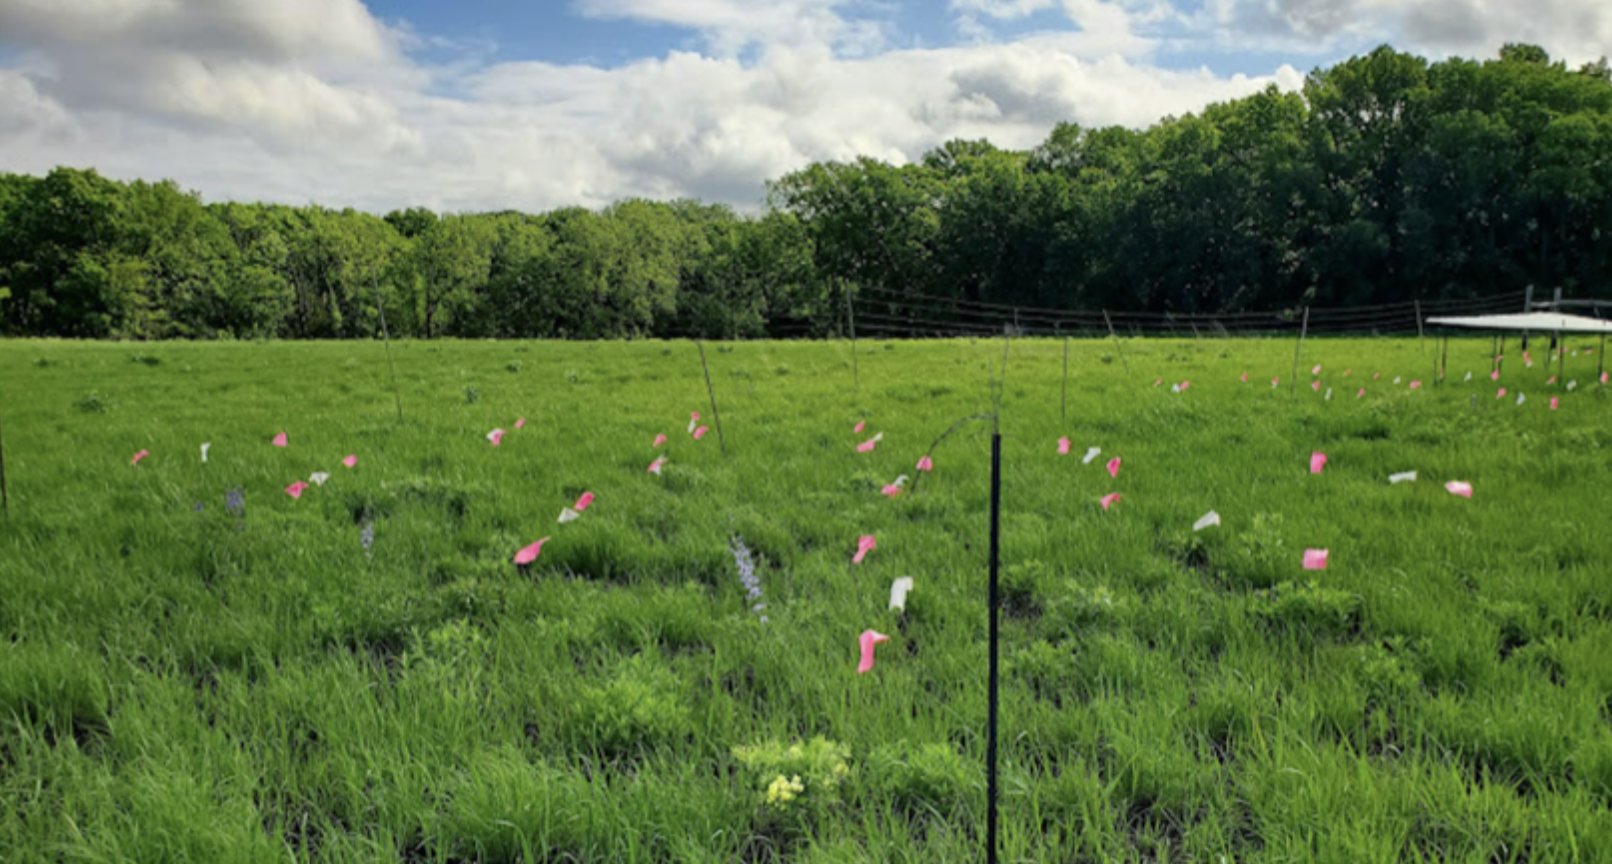 "Green field with flags marking plants identified in research"